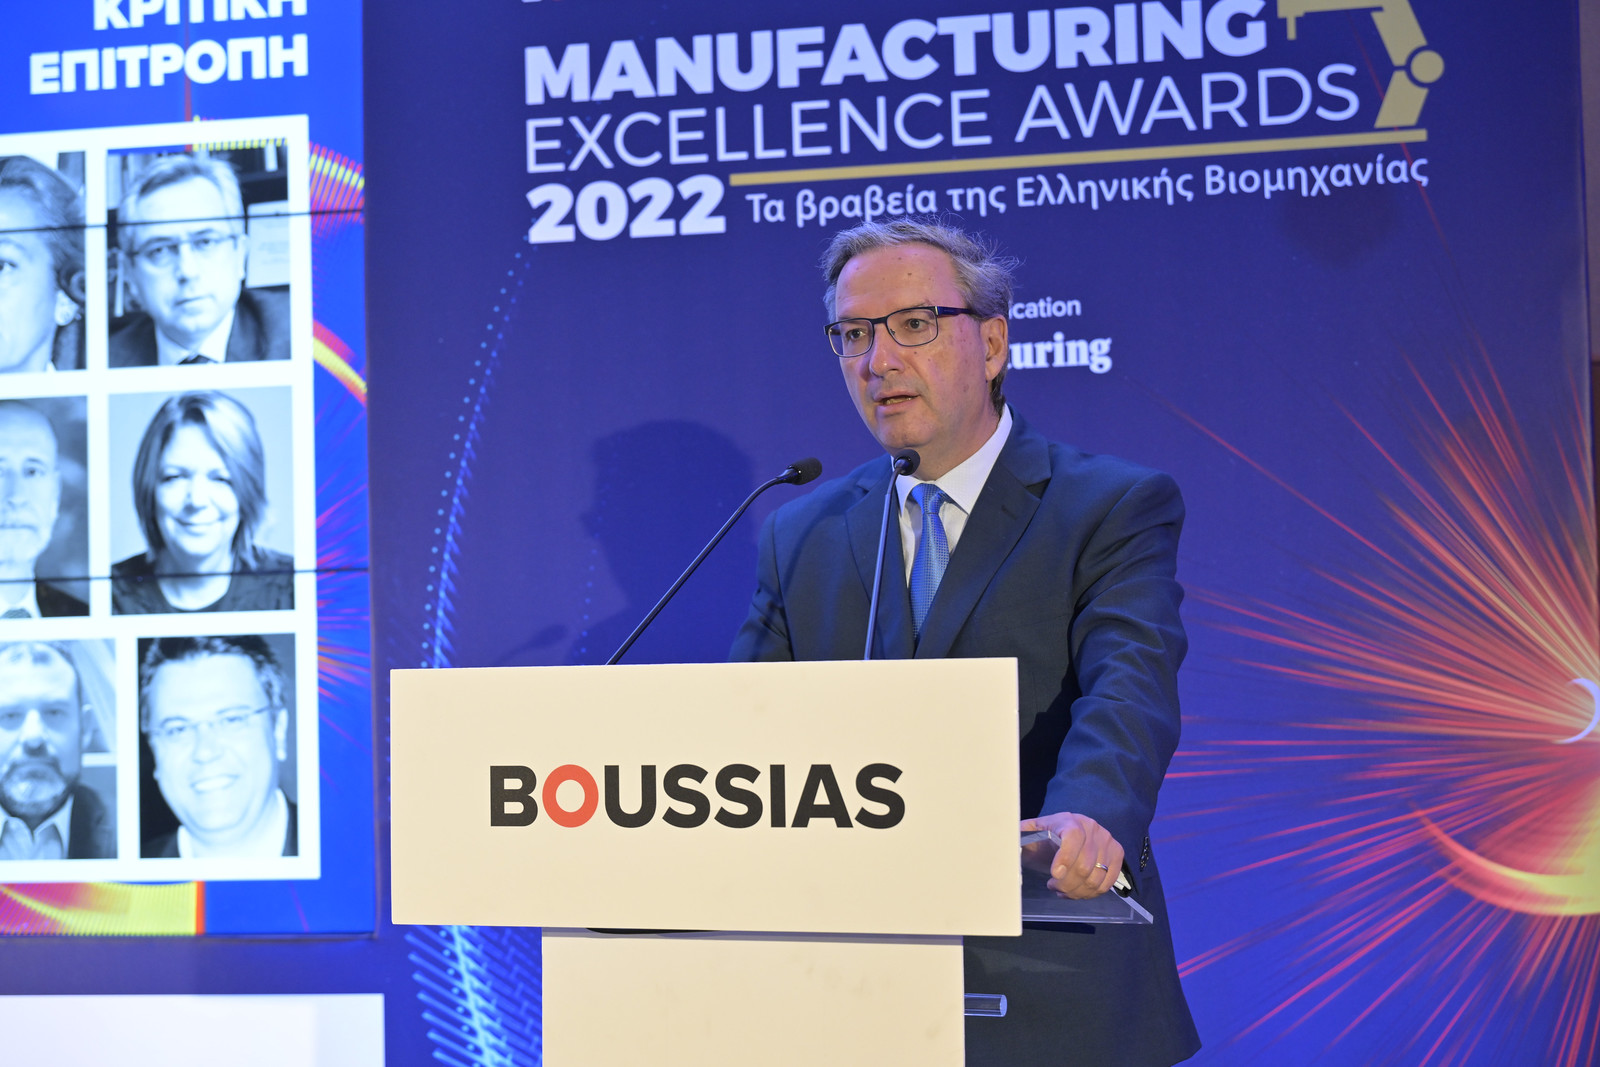 Manufacturing Excellence Awards 2022